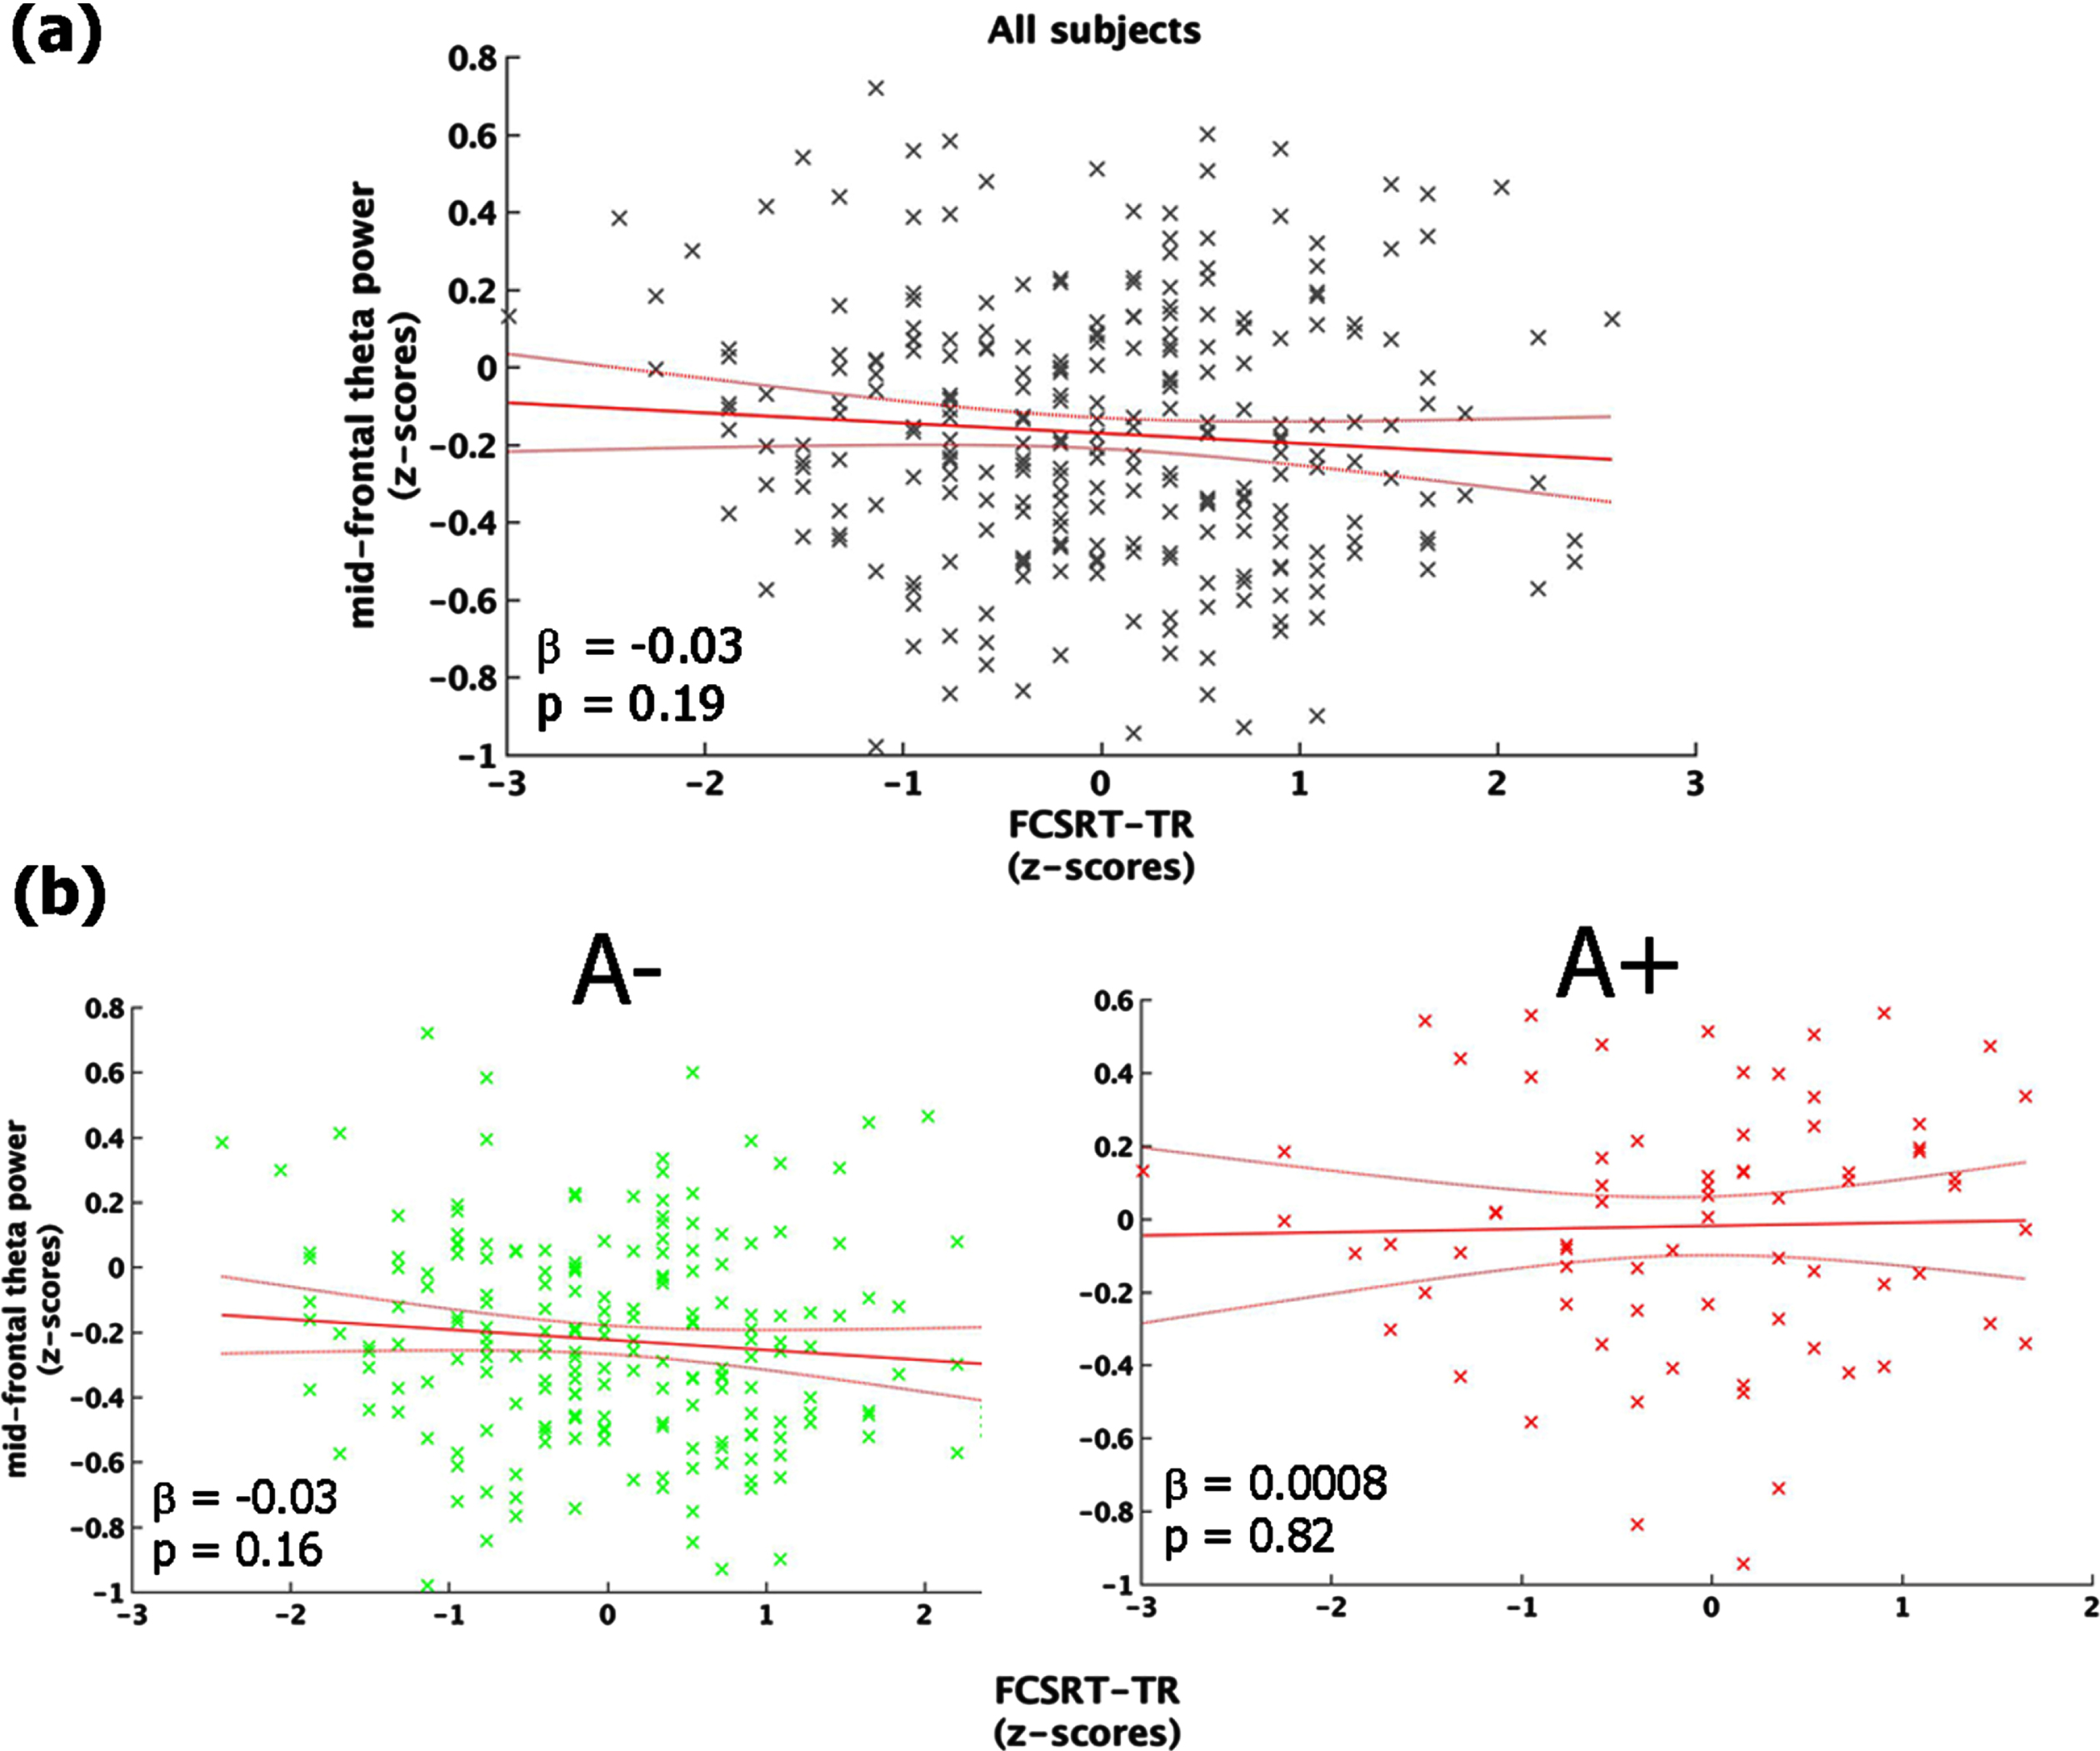 Link between mid-frontal theta-band power and memory performance (FCSRT-TR). Panel (a) shows the linear regression model carried out on the whole sample. Panel (b) depicts the same model performed on A– (left-column) and A+(right-column), separately. All the plot shows the raw data (black/green/red stars), the fit of the model (red straight-line) with 95% confidence interval (red curved-line), its slope (β-coefficients) and the associated p-value.